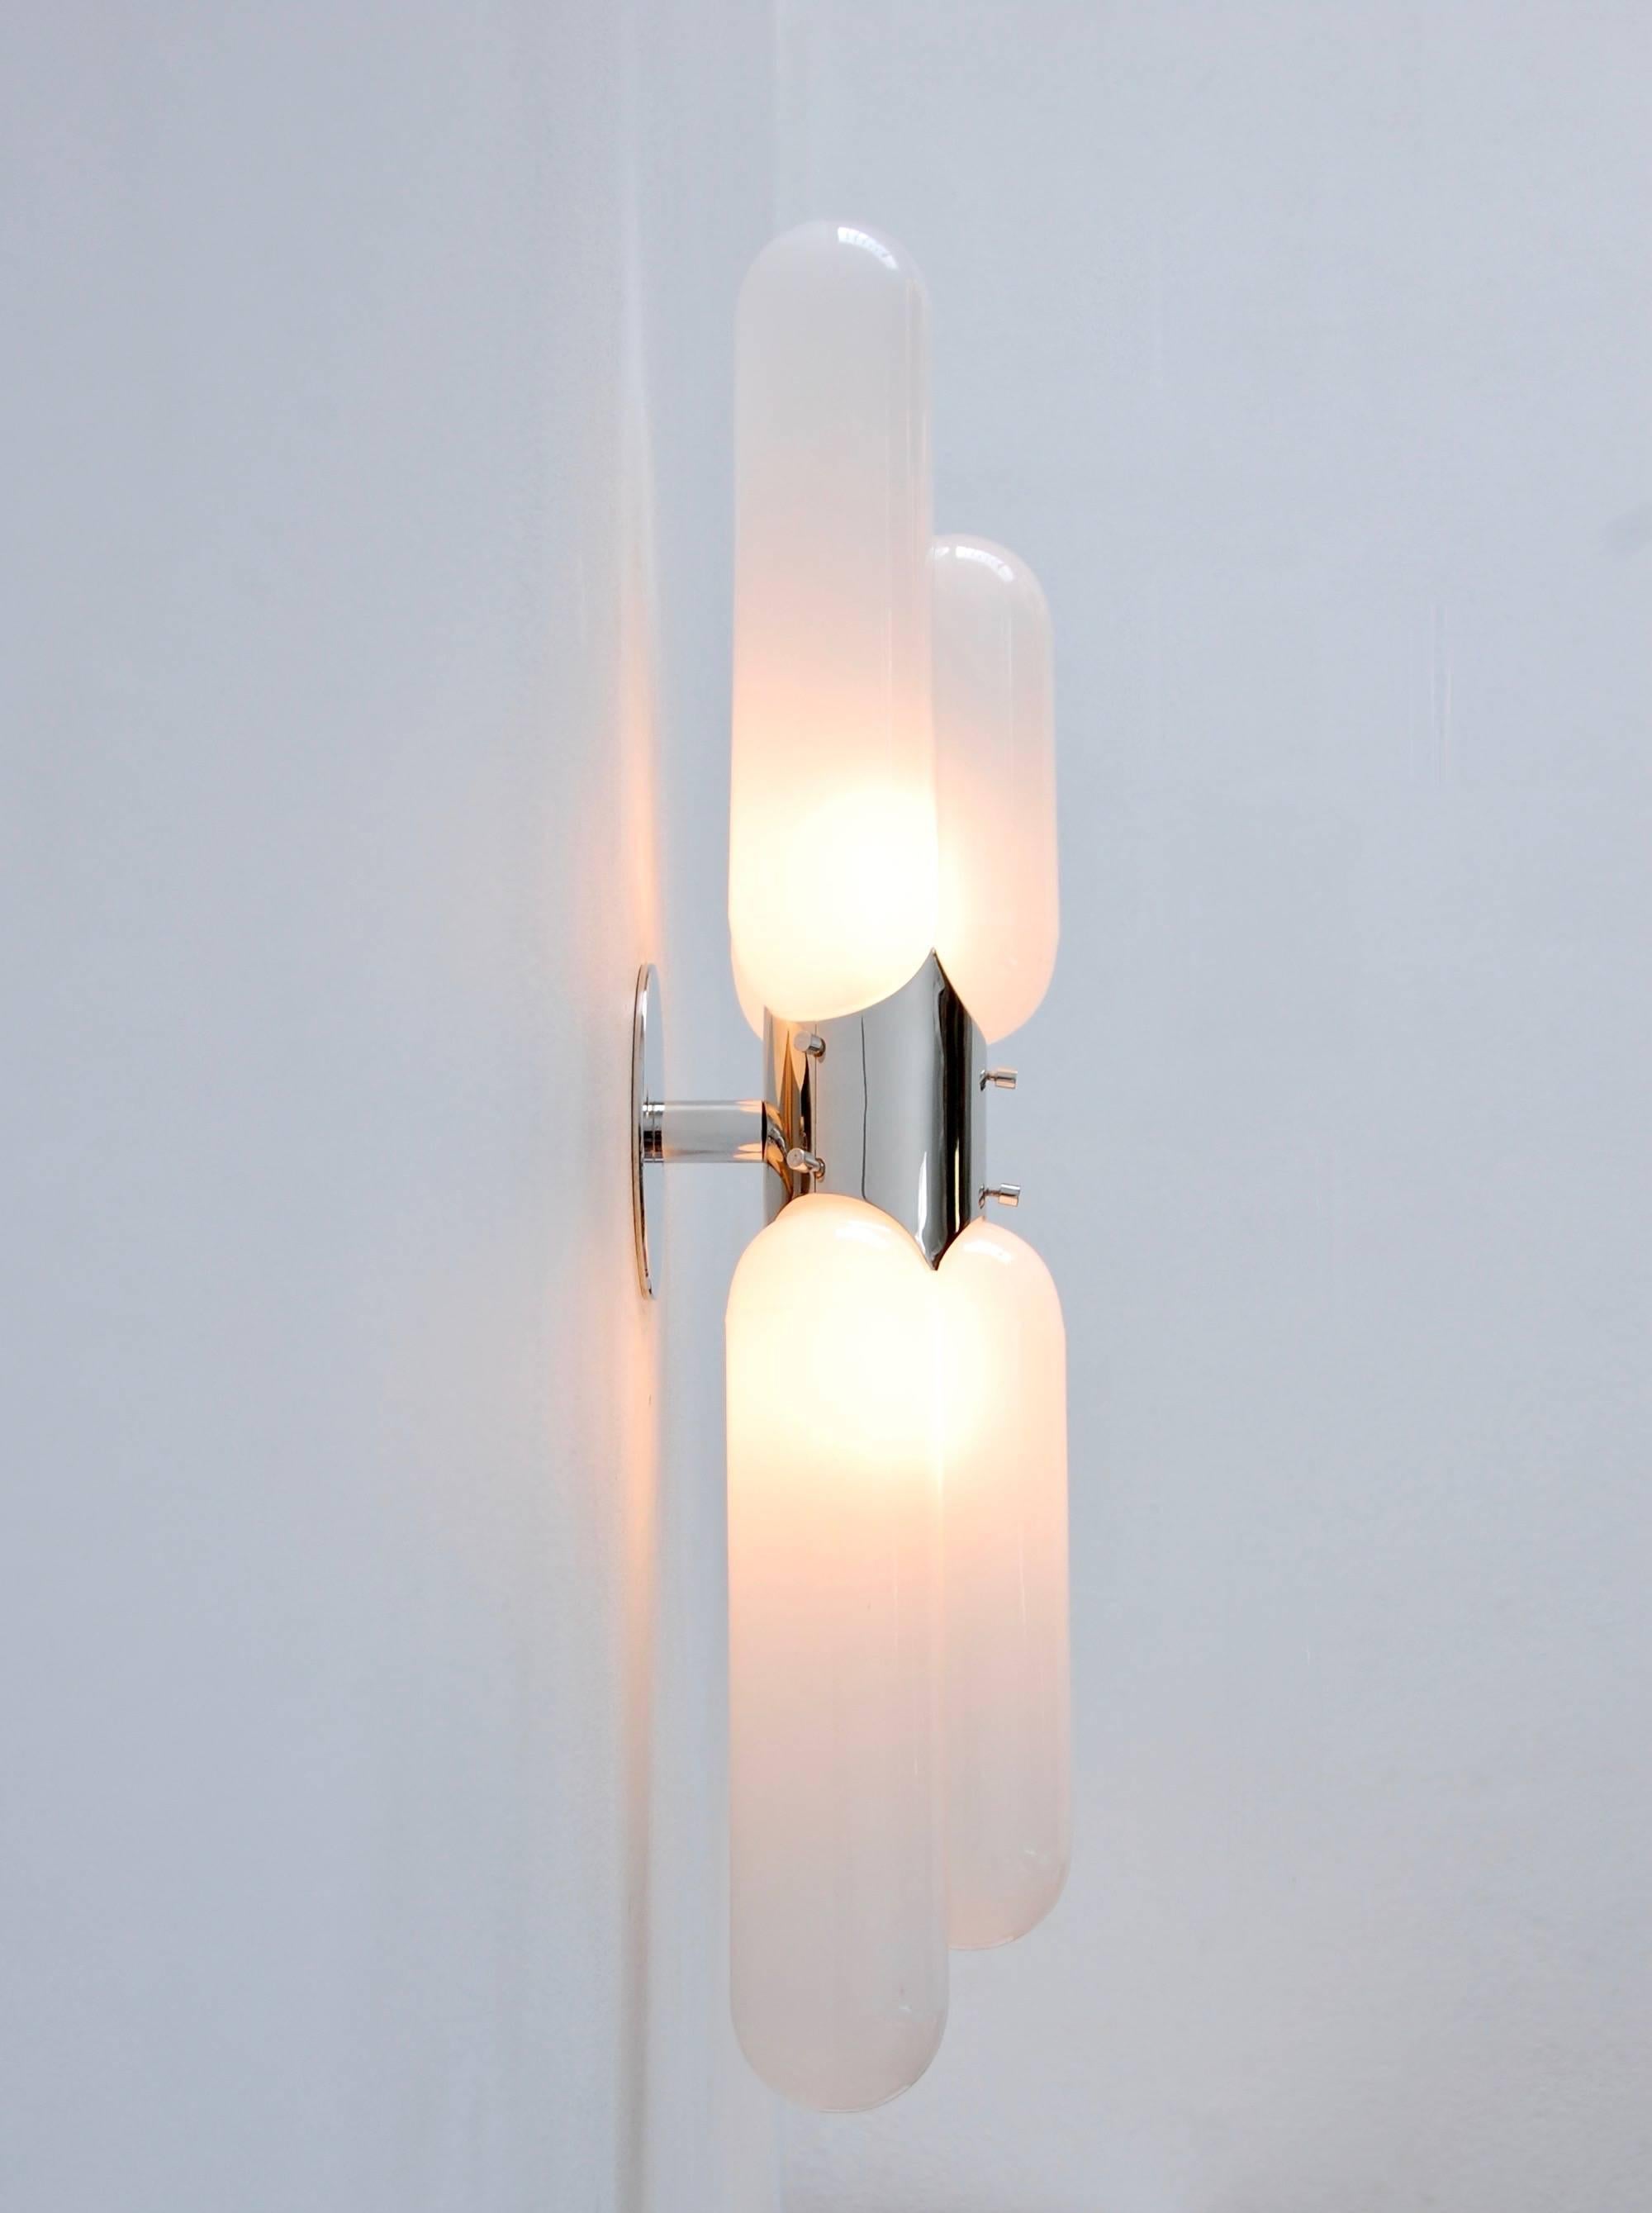 Five sconces of stunning glass, brass and nickel tubular sconces from Italy by Carlo Nason for Mazzega. Modern 1960s Italian lighting design. Two E26 light sockets per sconce. Fully restored and ready to use.
We at Lumfardo Luminaires do all the